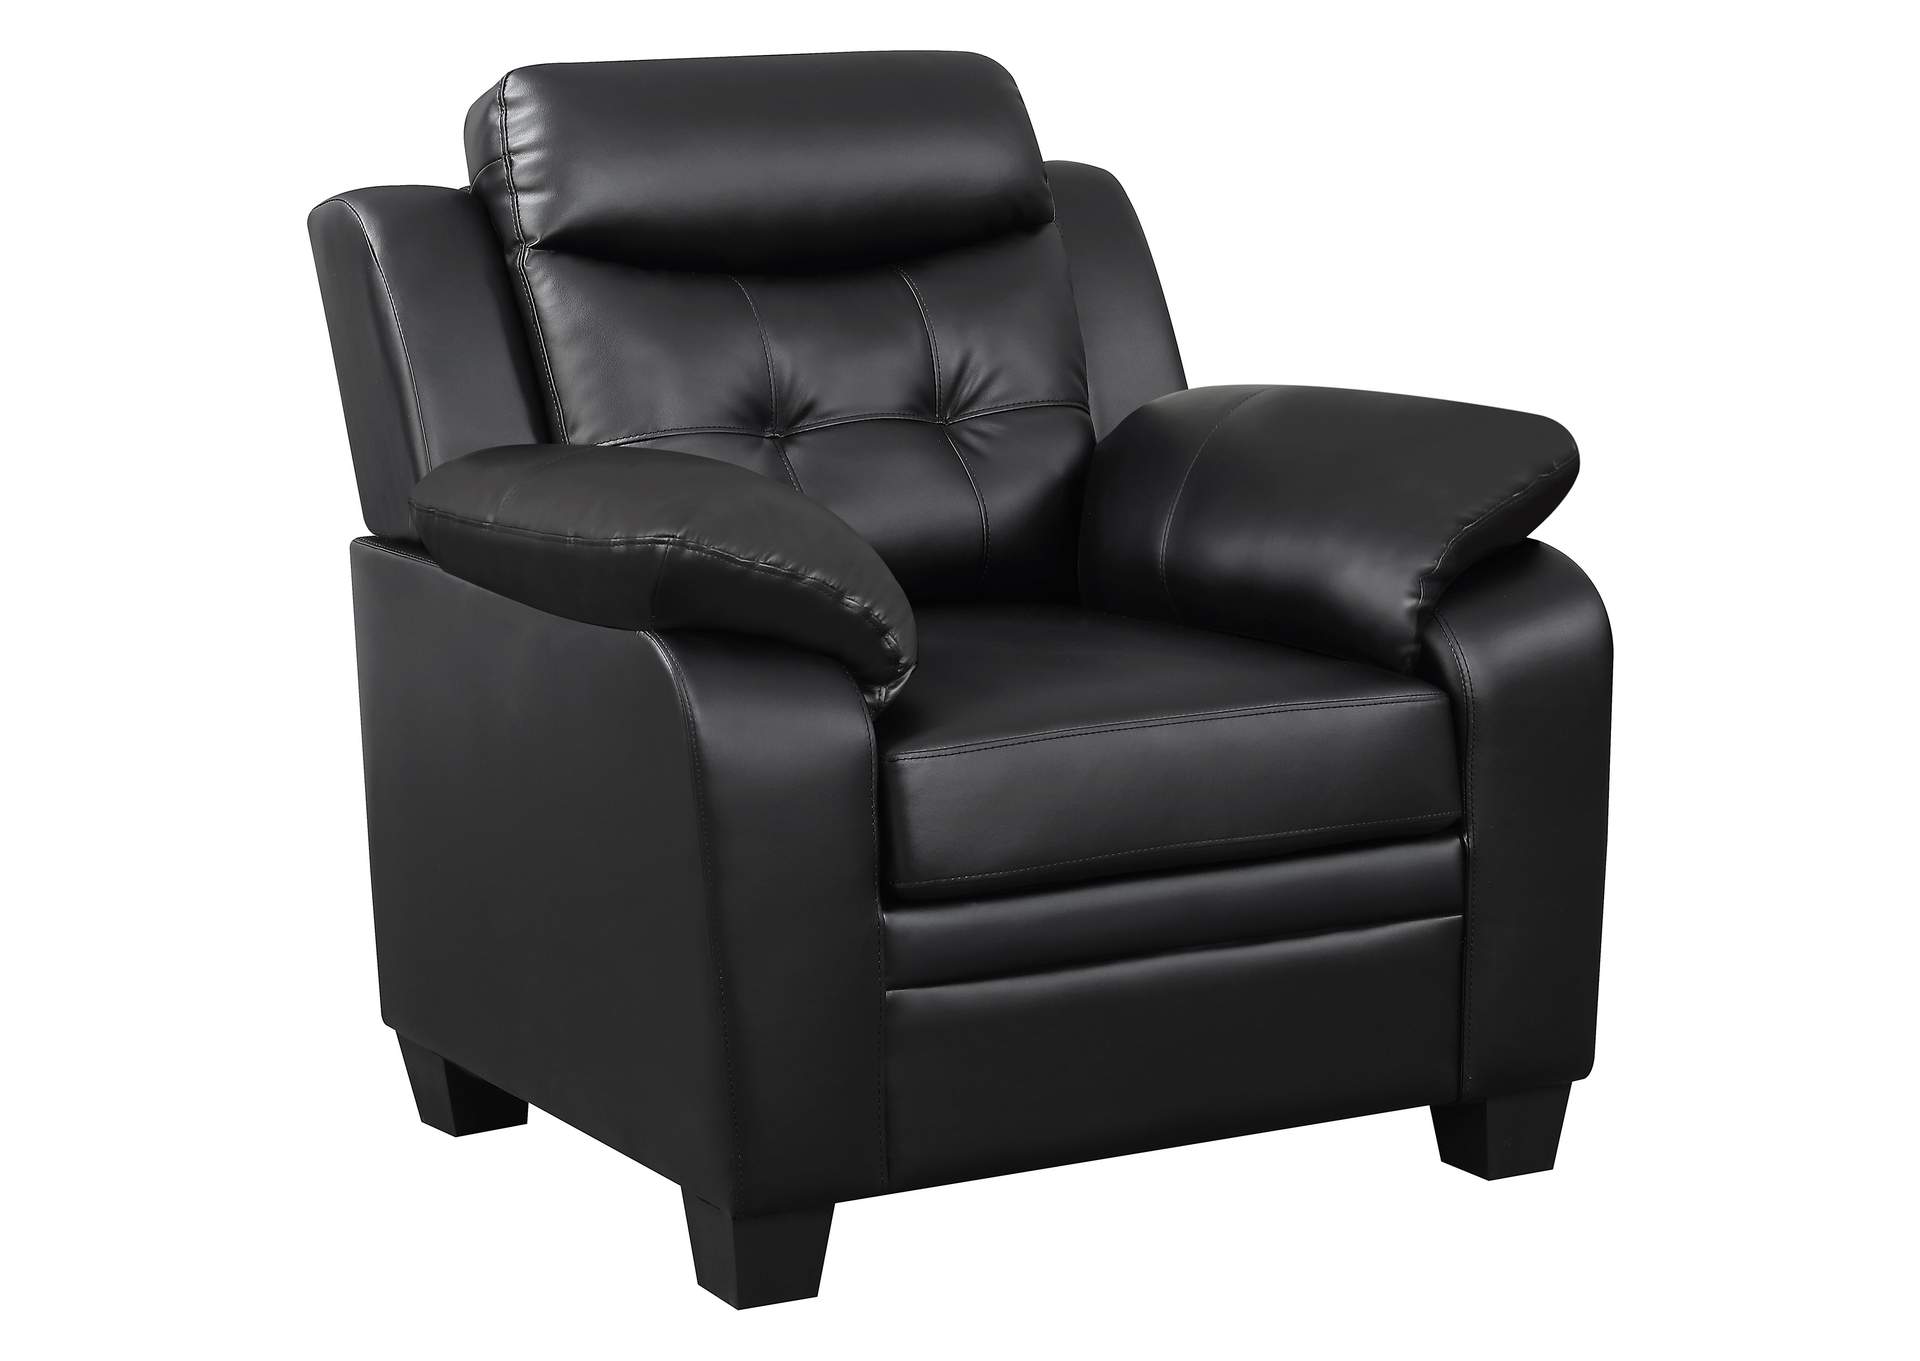 Finley Tufted Upholstered Chair Black,Coaster Furniture